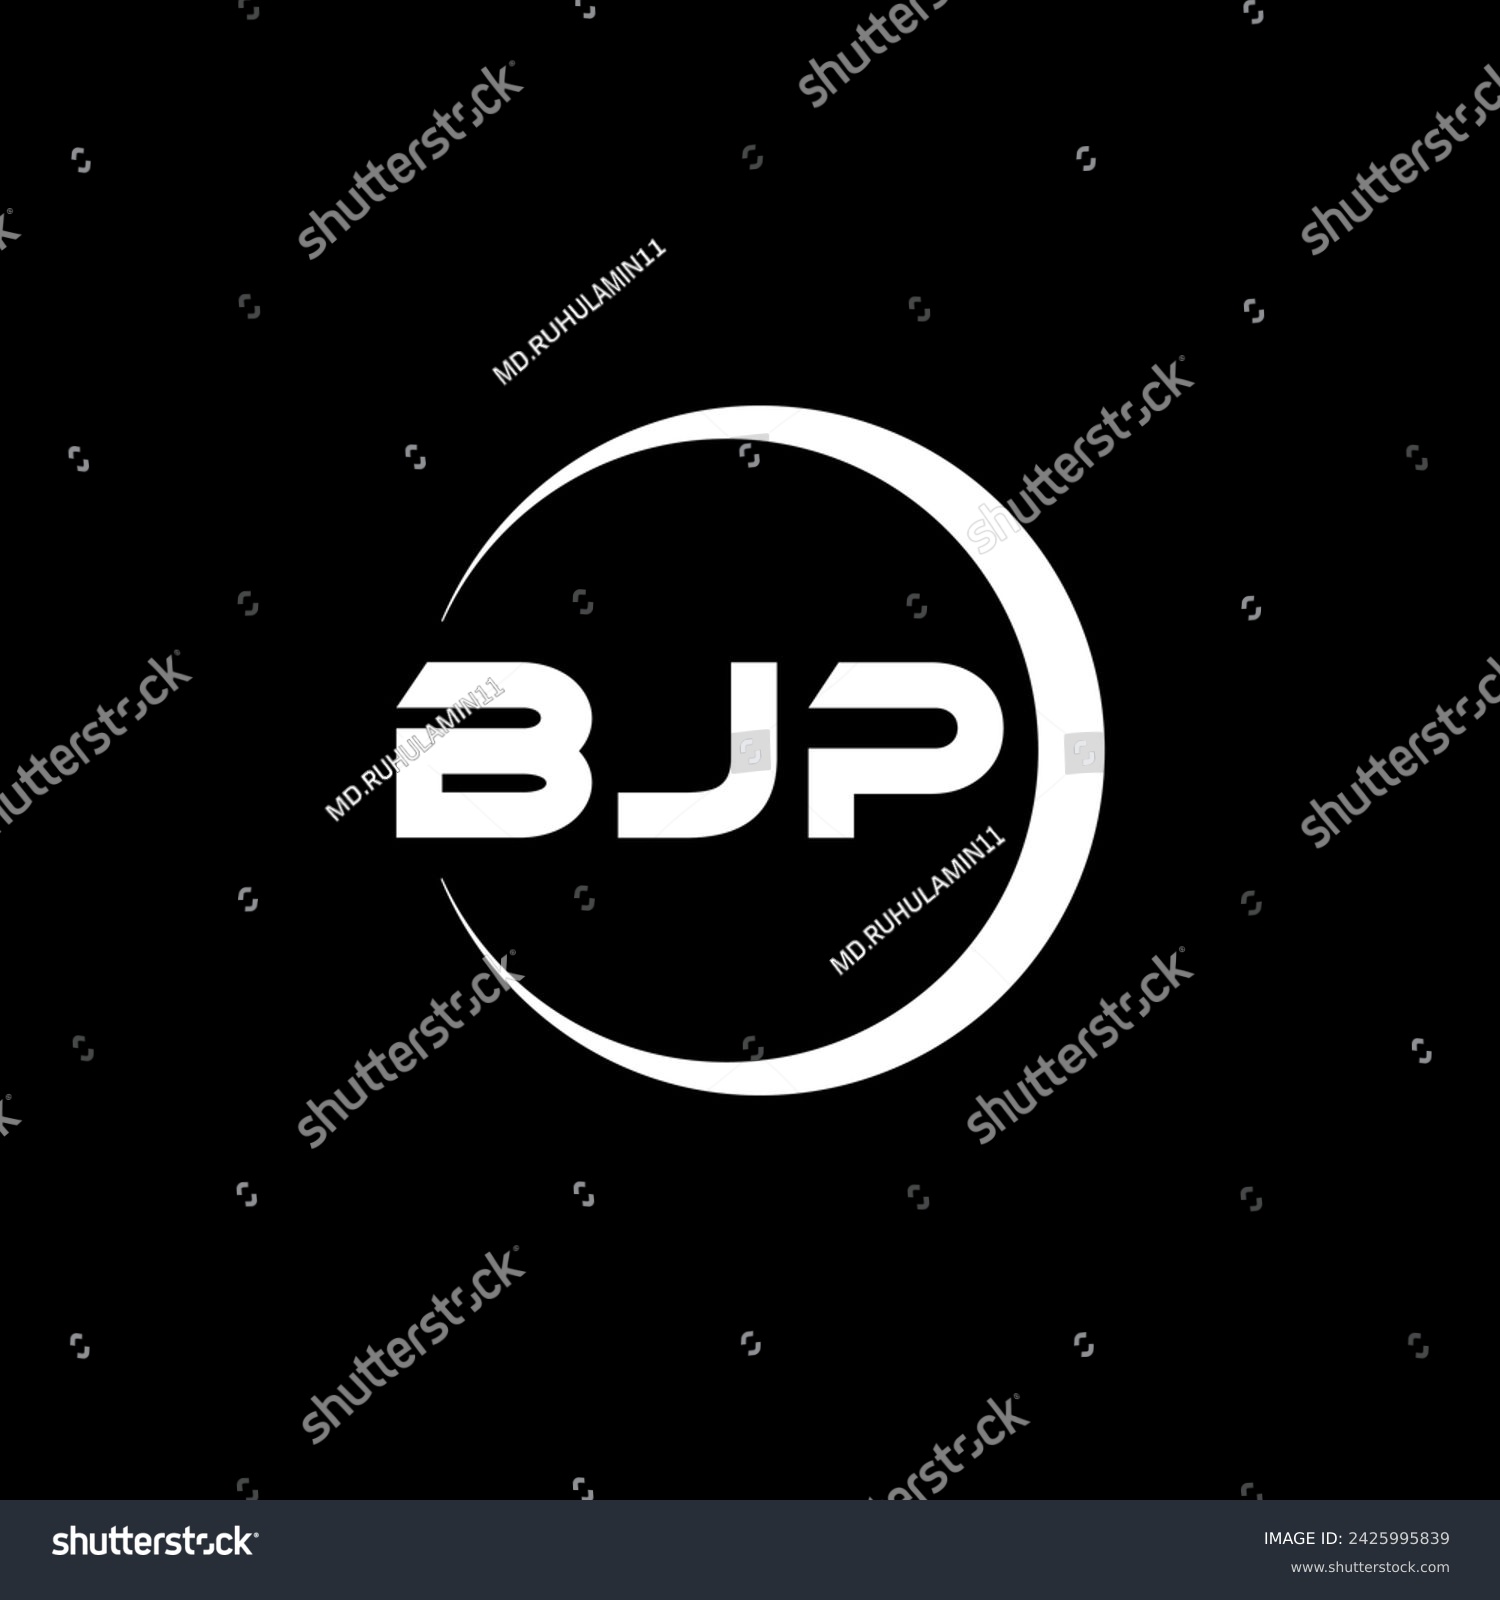 SVG of BJP Letter Logo Design, Inspiration for a Unique Identity. Modern Elegance and Creative Design. Watermark Your Success with the Striking this Logo. svg